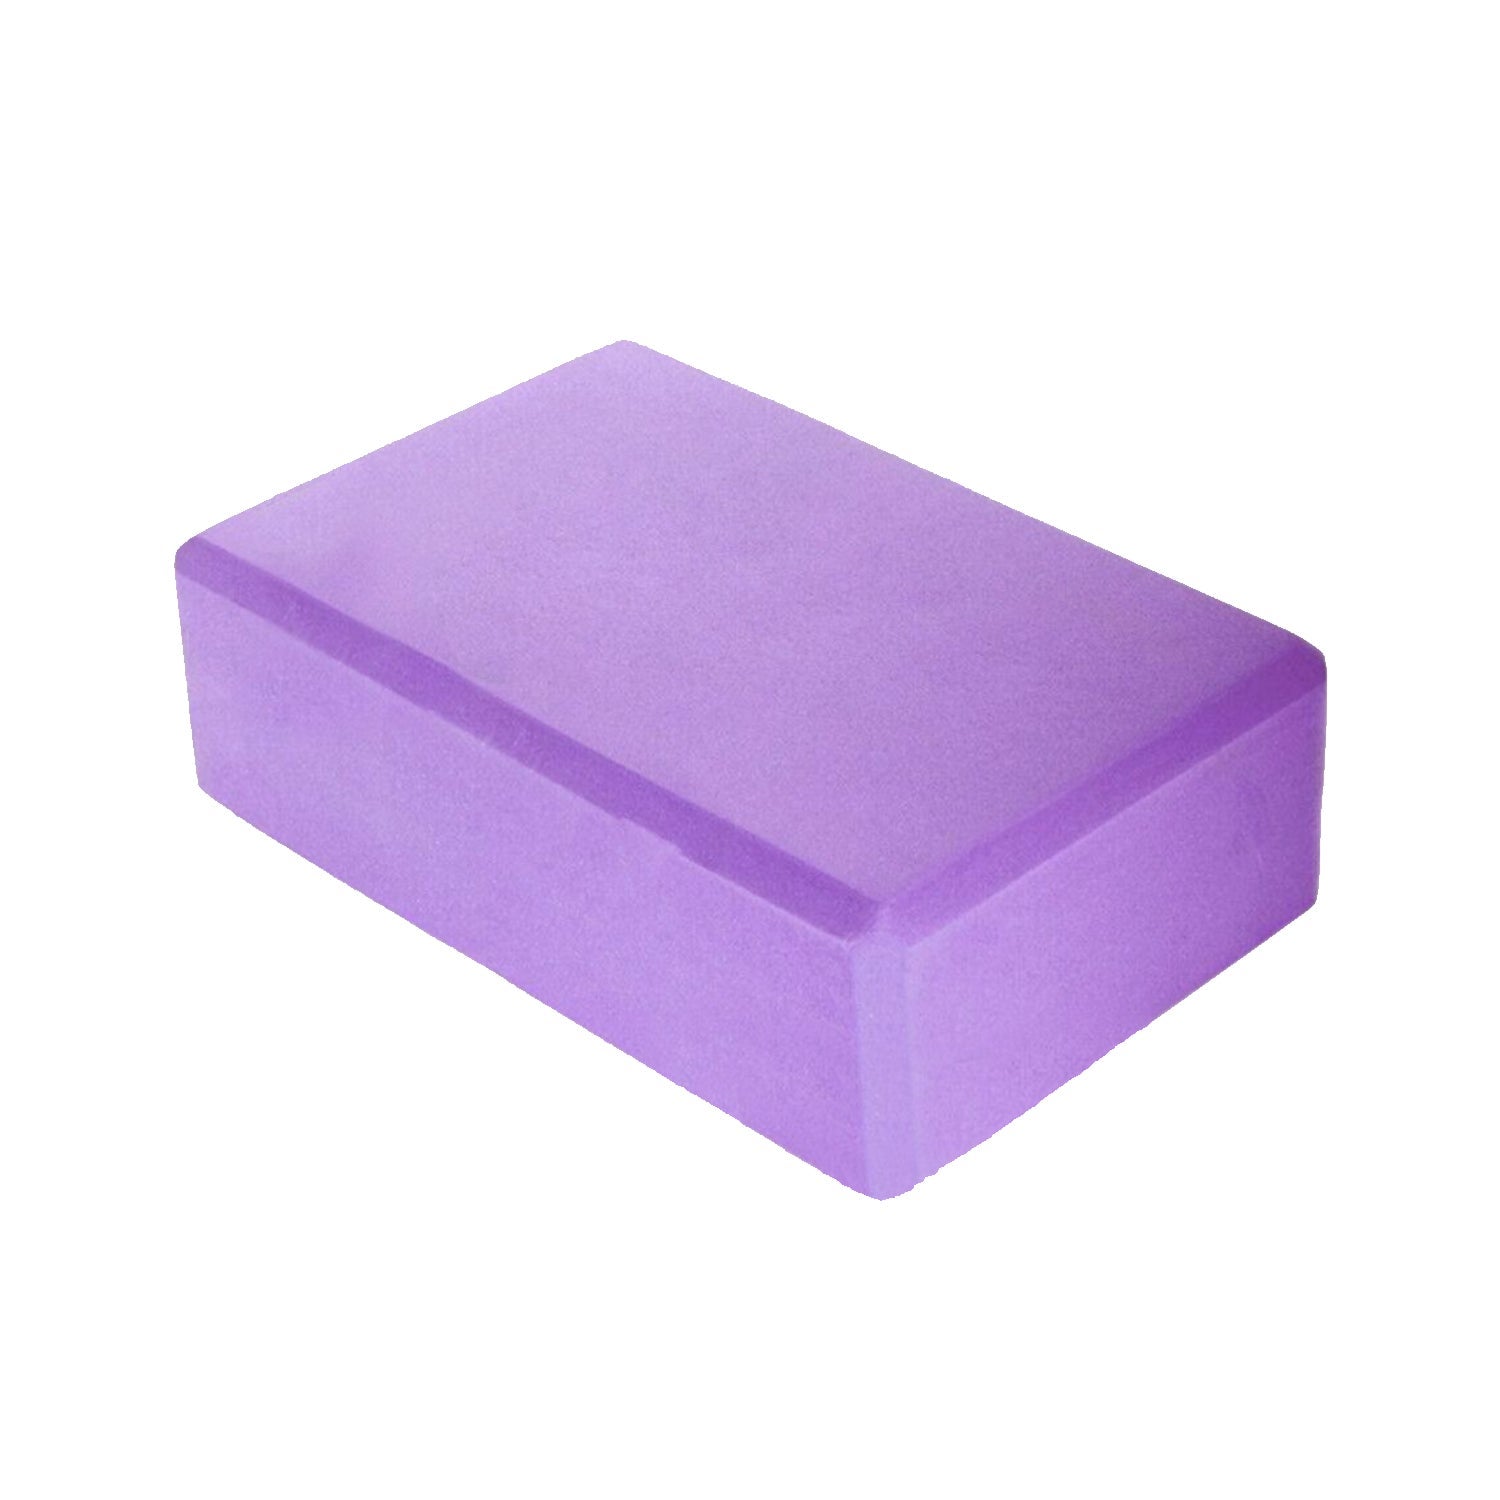 Fitness Gym Exercise Yoga Block Brick Foming Tool